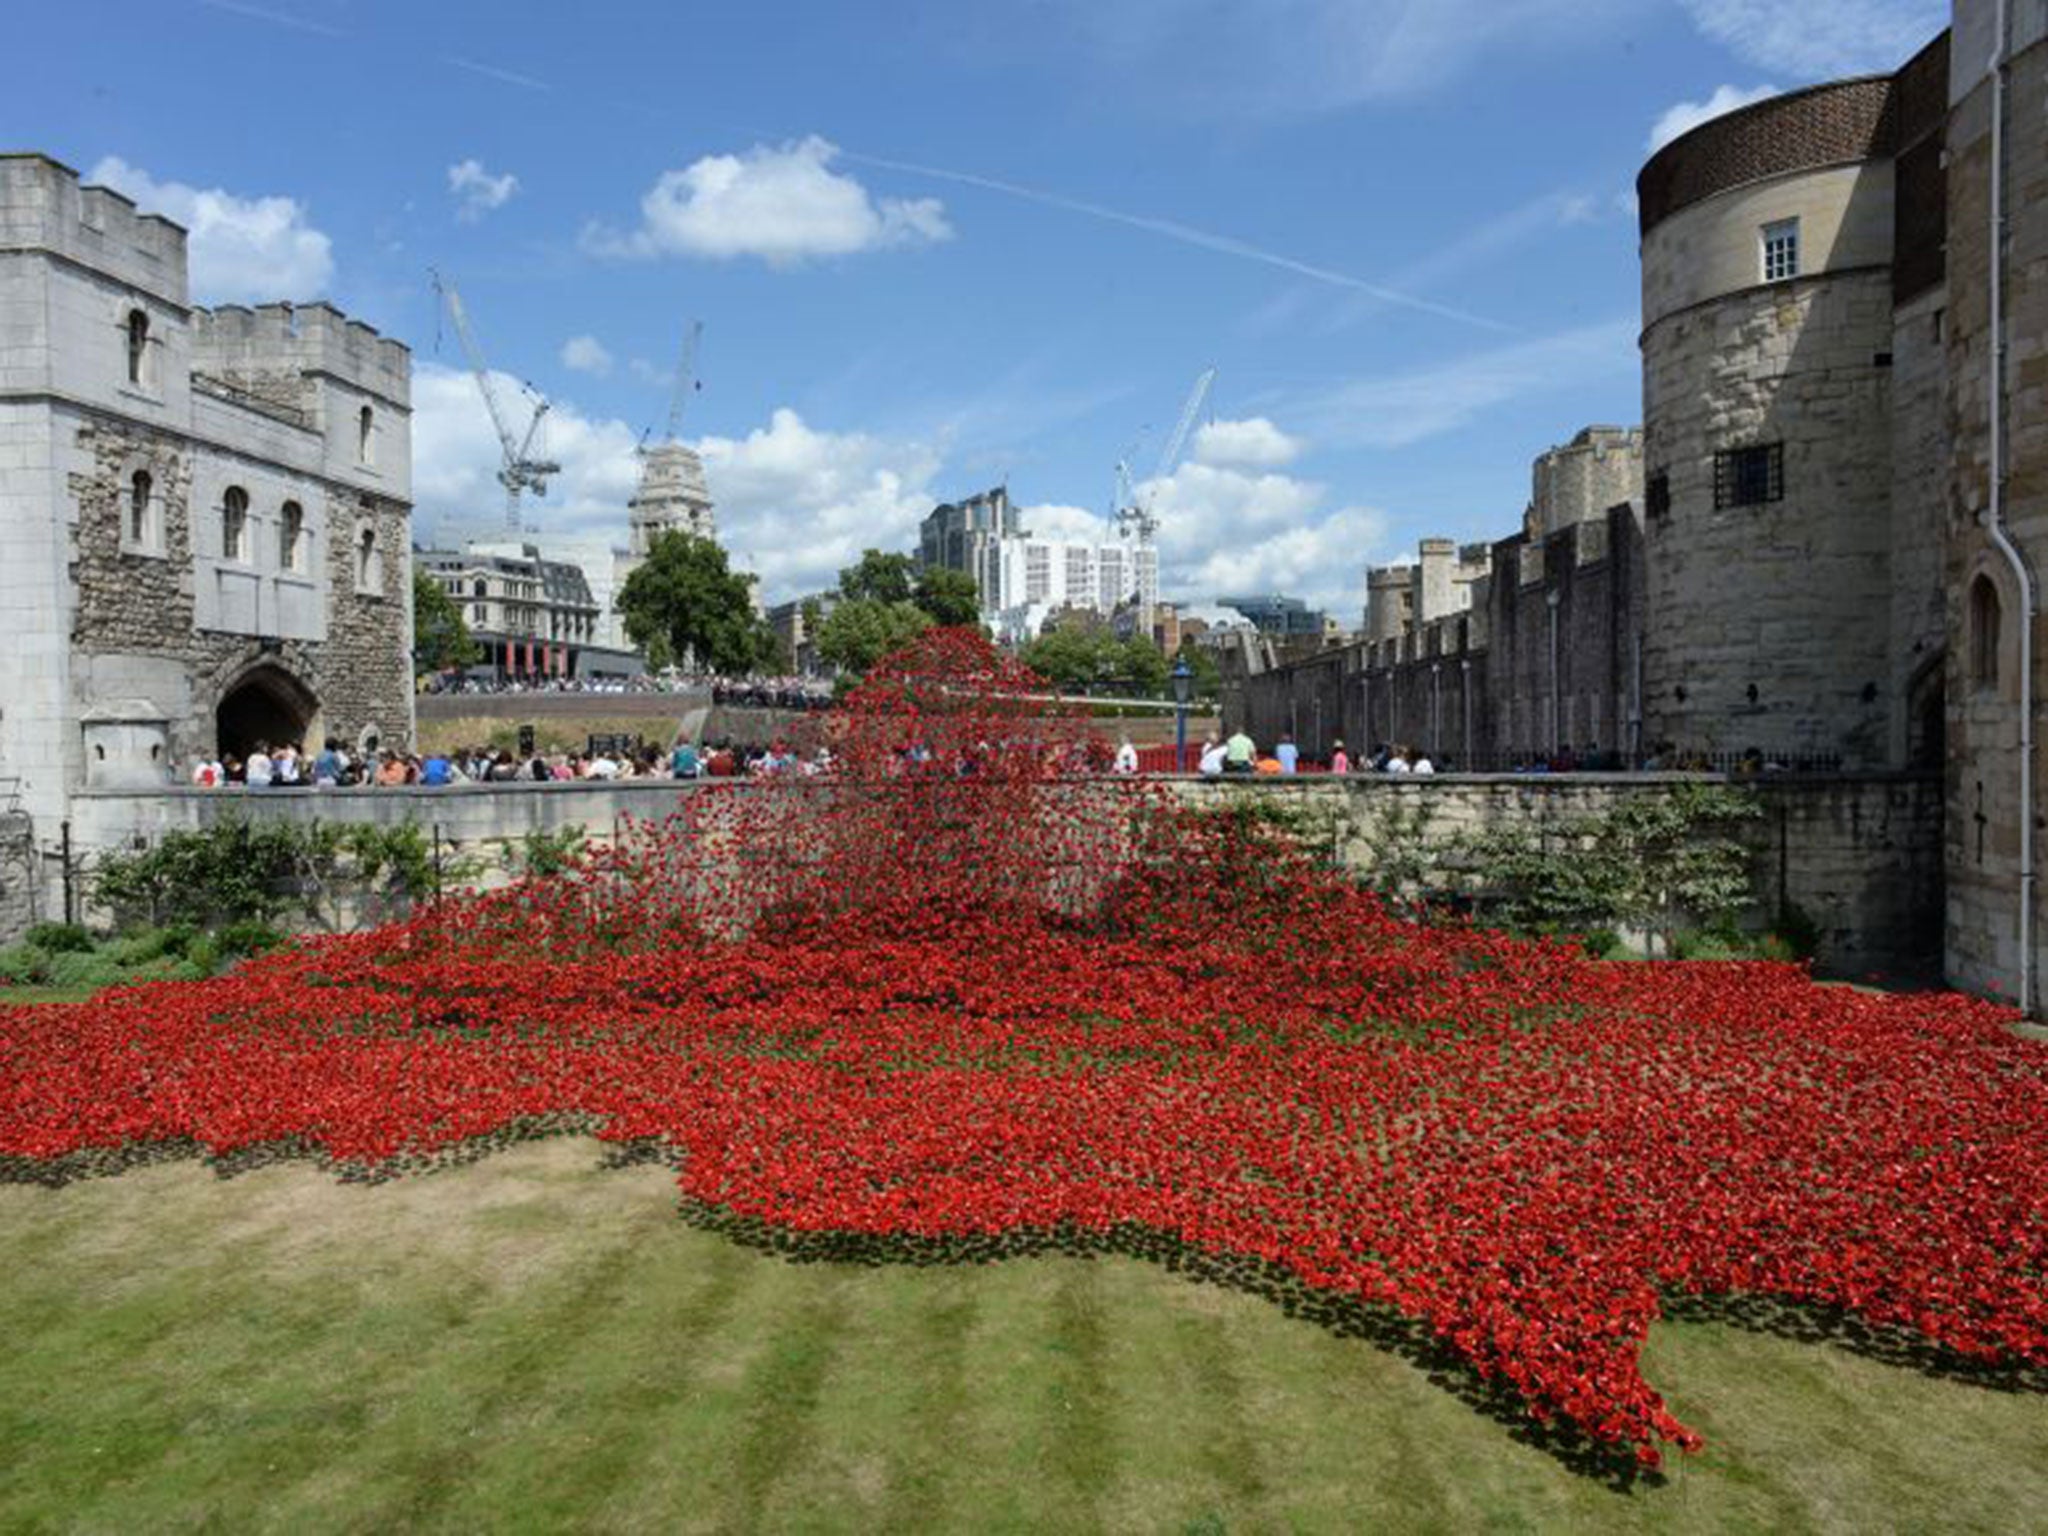 The art installation ‘Blood Swept Lands and Seas of Red’ by Paul Cummins at the Tower of London